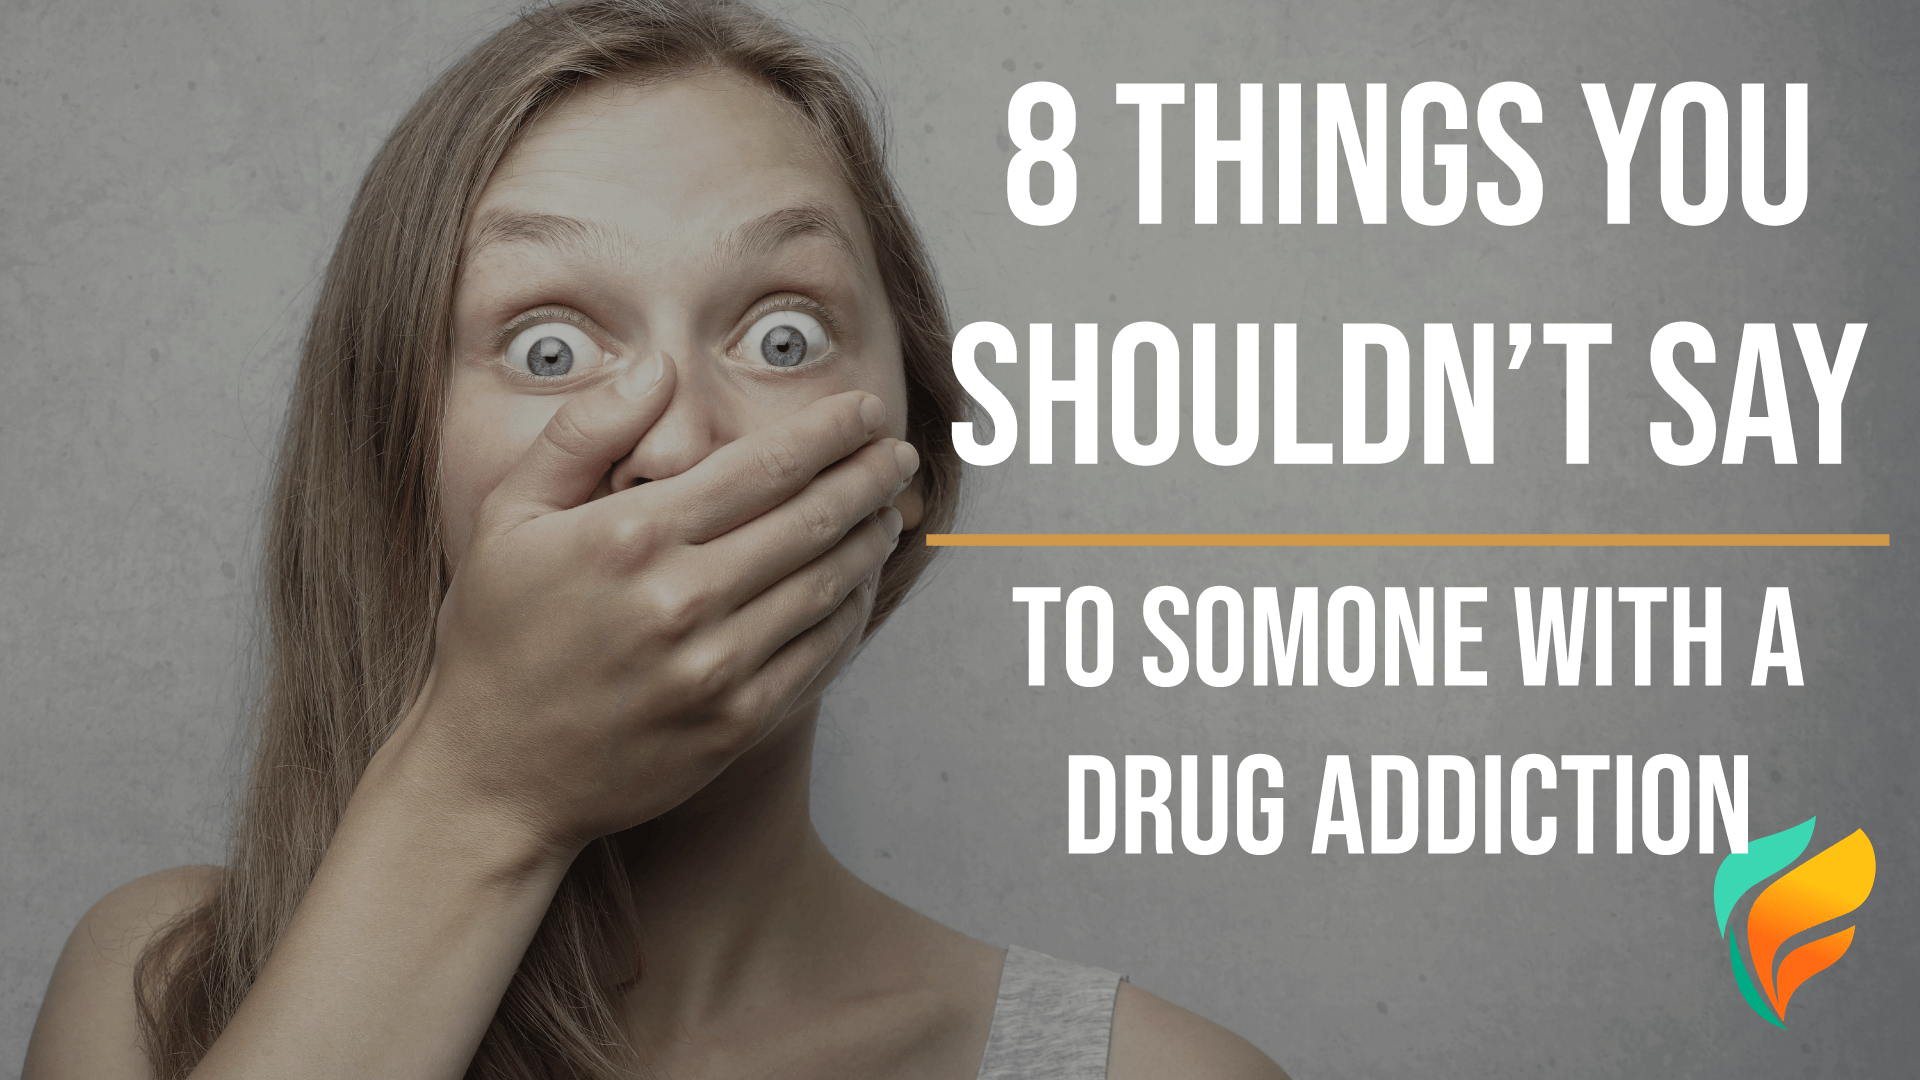 8 Things Not To Say to Someone with a Drug Addiction